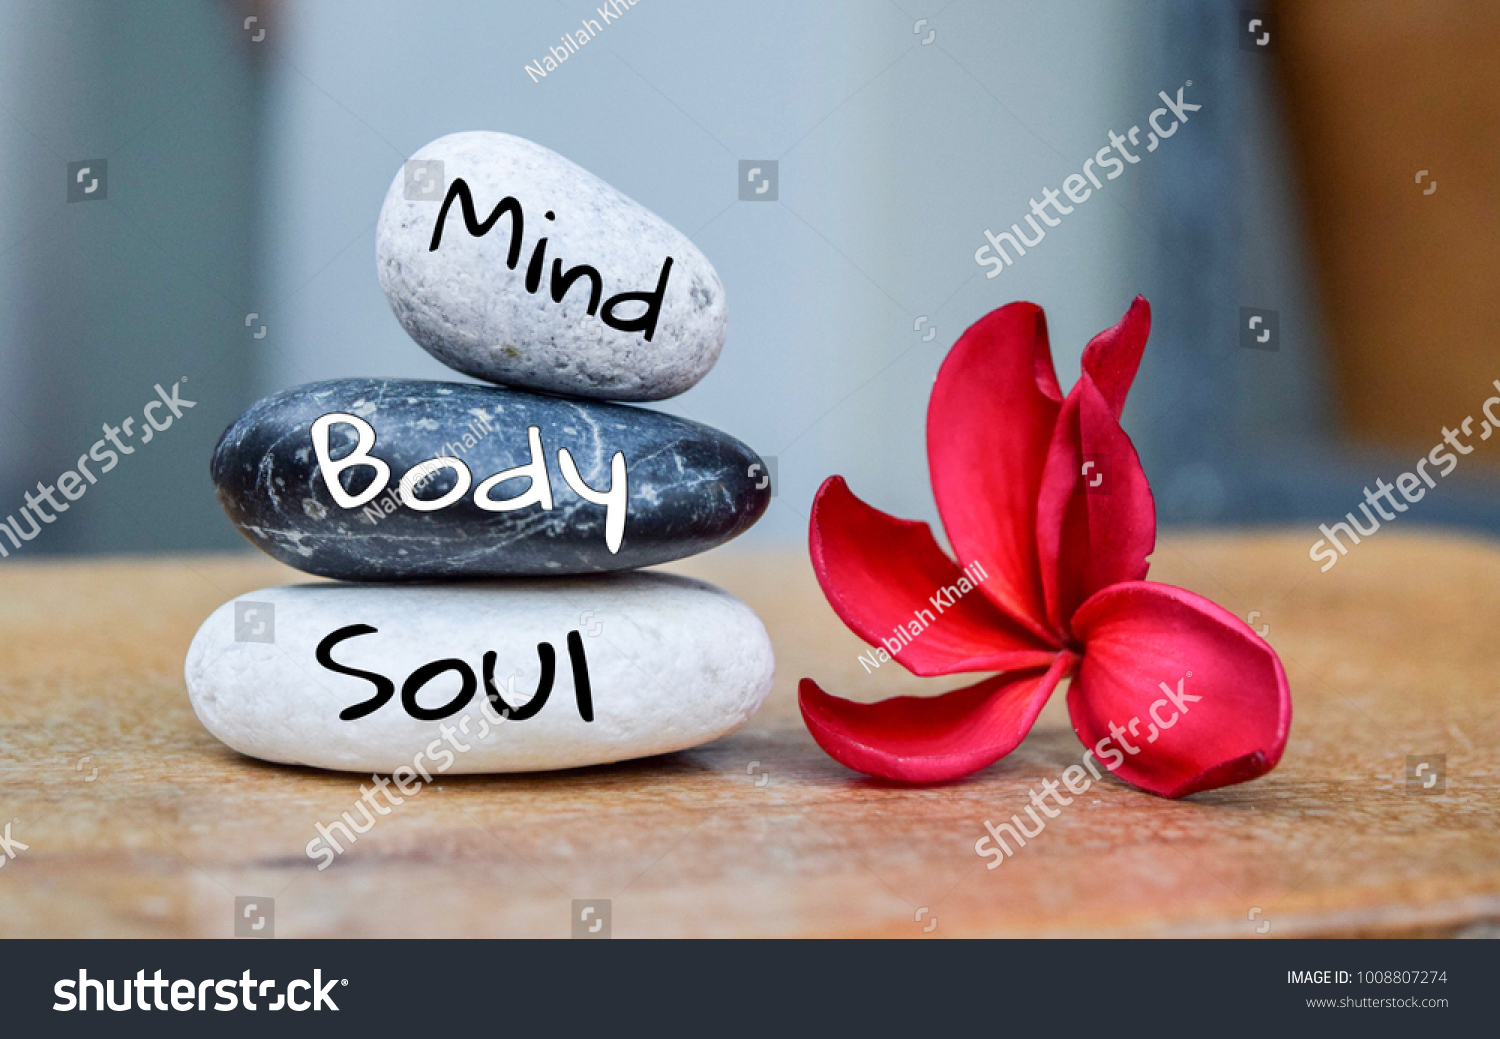 Holistic health concept of zen stones with deep red plumeria flower on blurred background. Text body mind soul. #1008807274